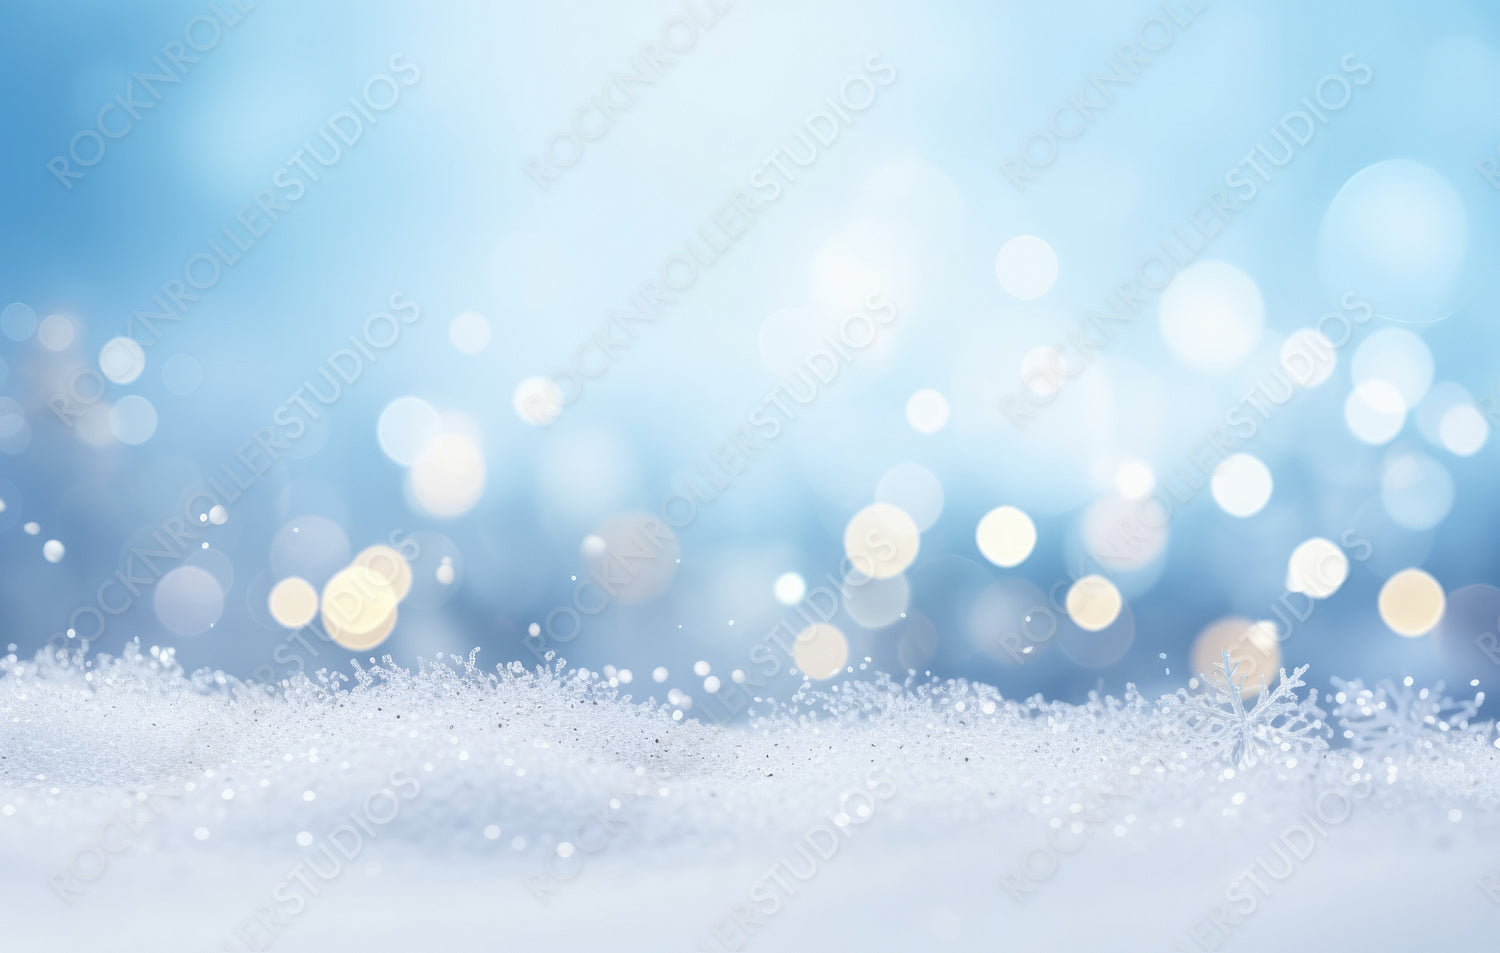 Festive Christmas natural snowy background, abstract empty stage, snow, snowdrift and defocused Christmas lights on light blue background, copy space.